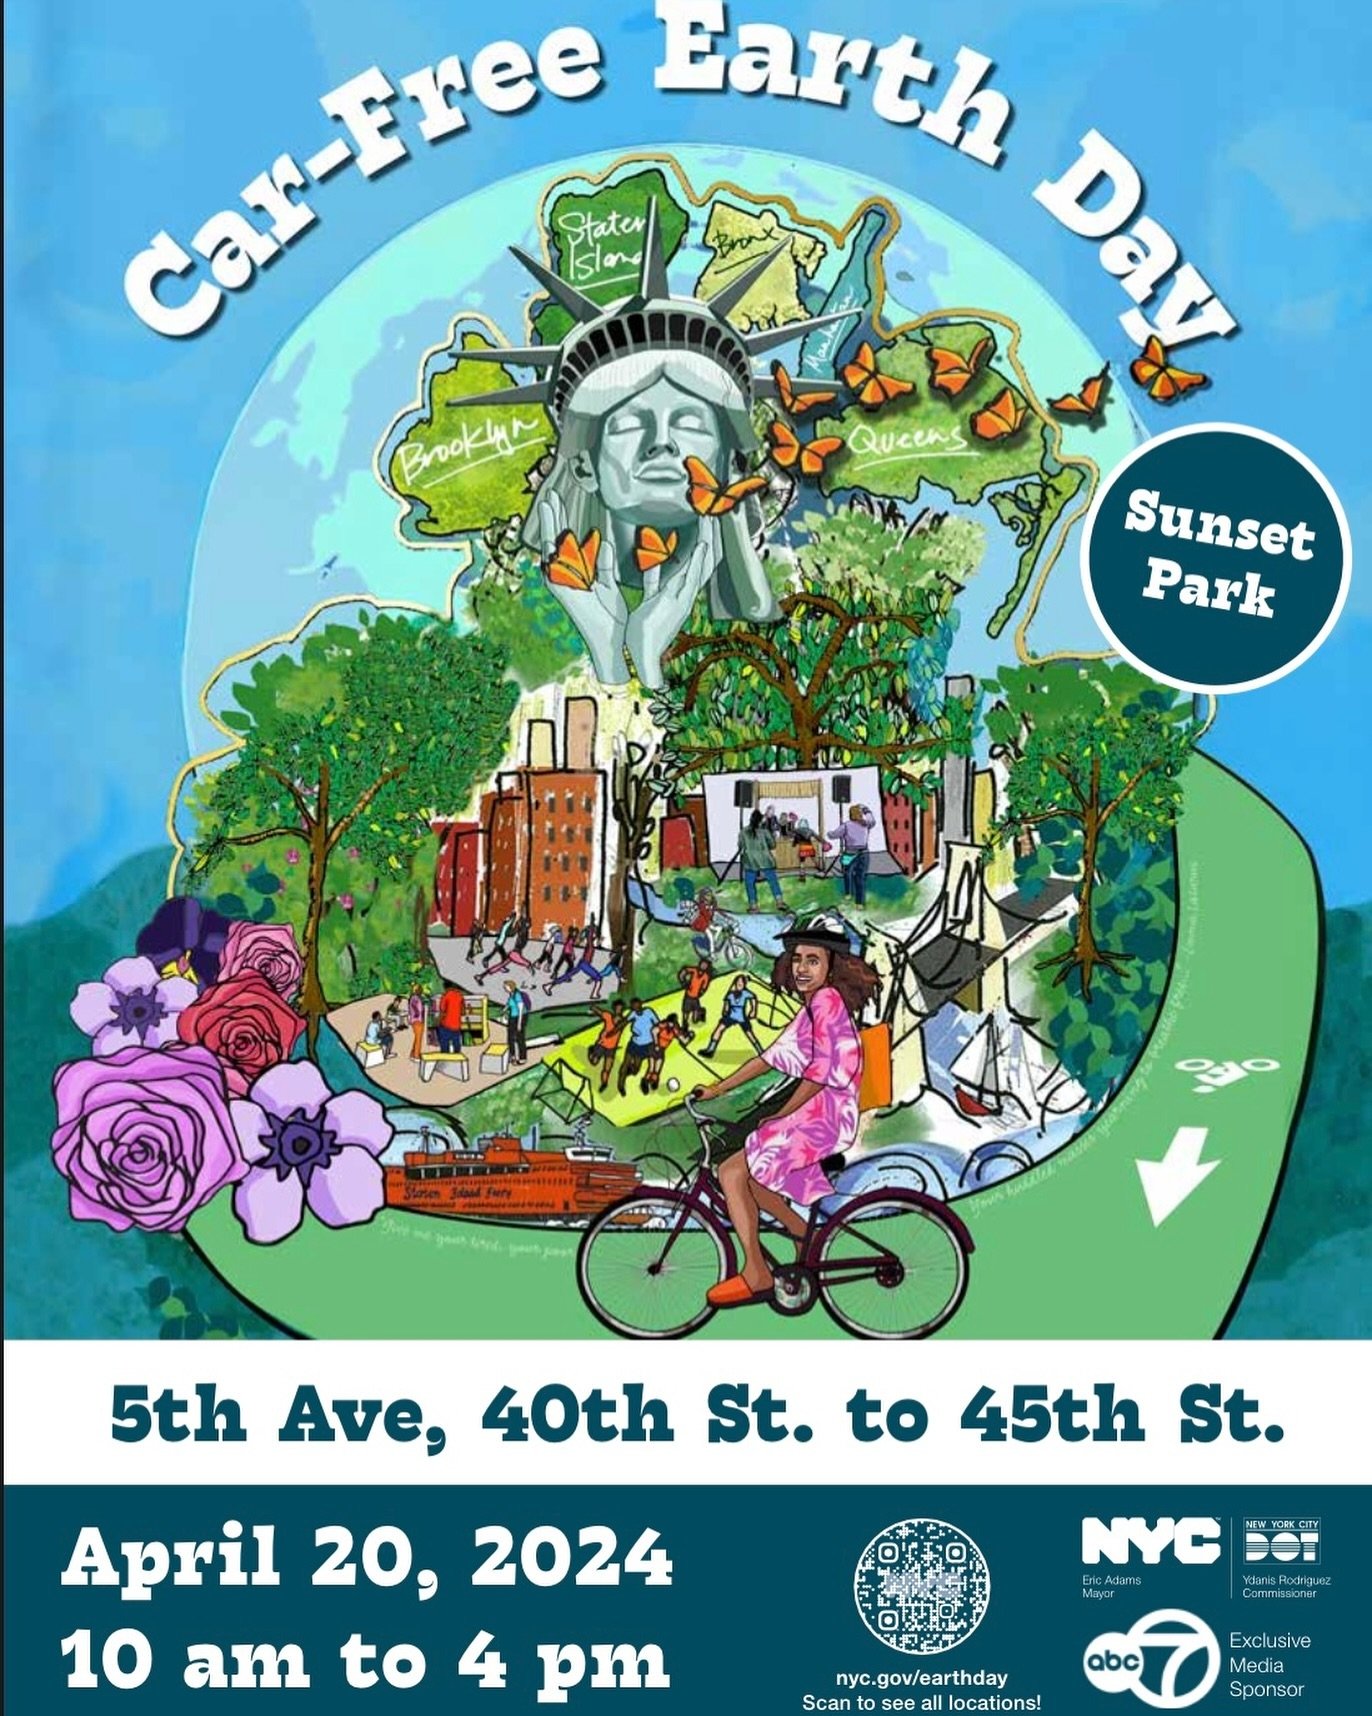 I&rsquo;ve got some gigs coming up! I&rsquo;ll be playing in BK near Sunset Park for @nyc_dot Car Free Earth Day on 4/20 at 3 PM. Full band with @aaronginns on 🥁 @d.r_funkenstein on bass 🎸 &amp; @mishaswersey on keys 🎹 Come out and play with us!

